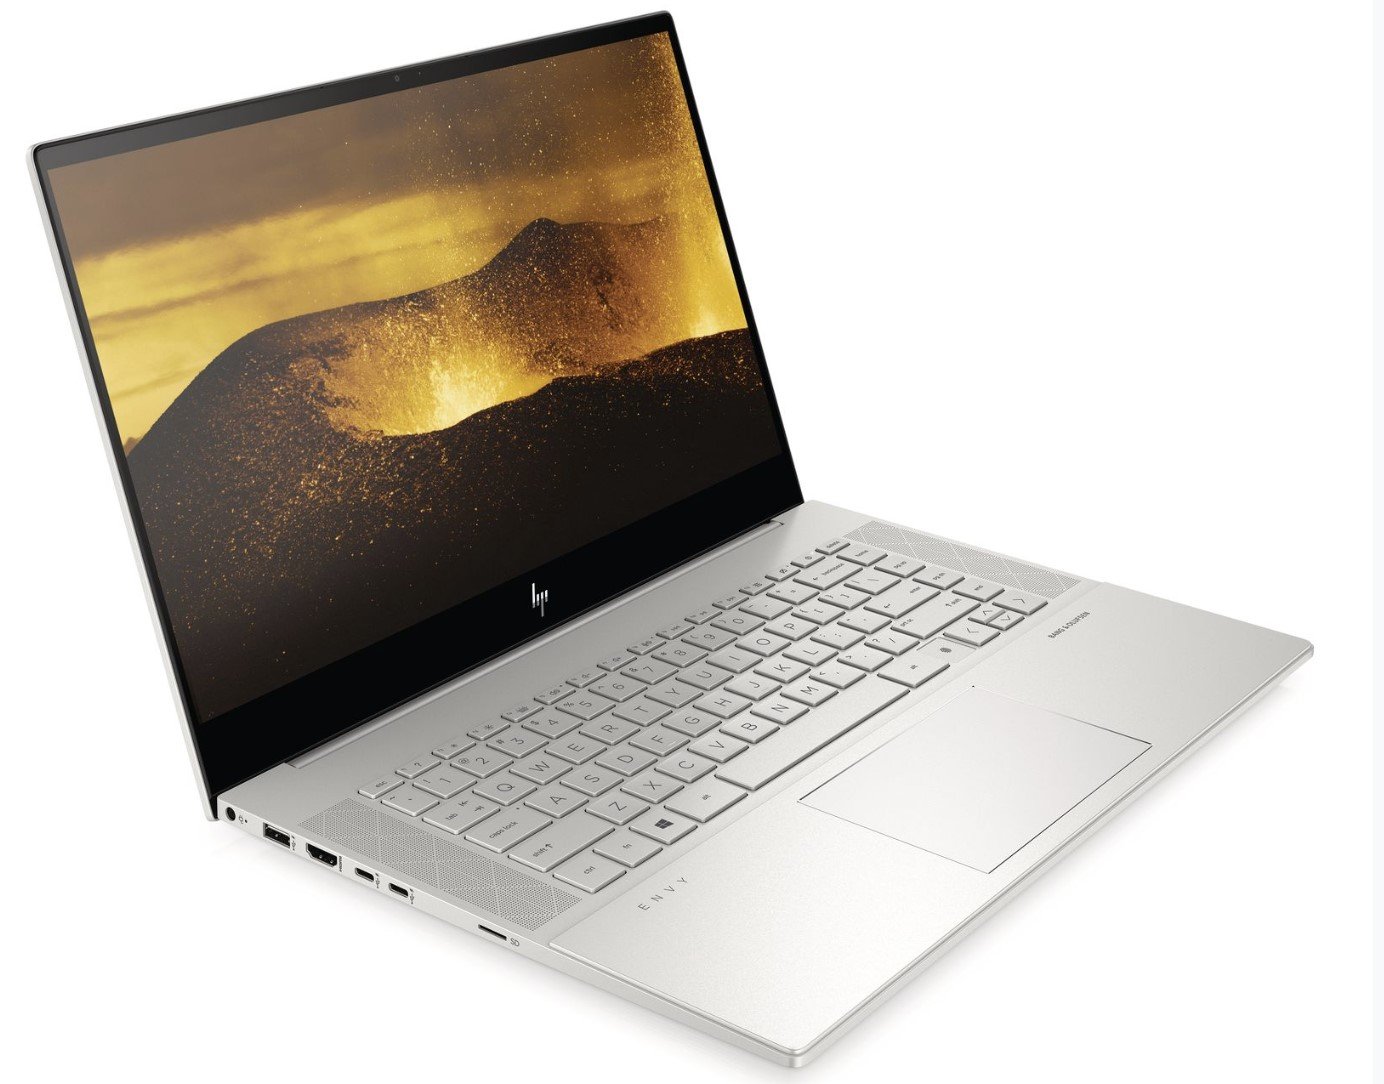 HP ENVY 15 for 2020 takes on the MacBook Pro 16 with minimalist 